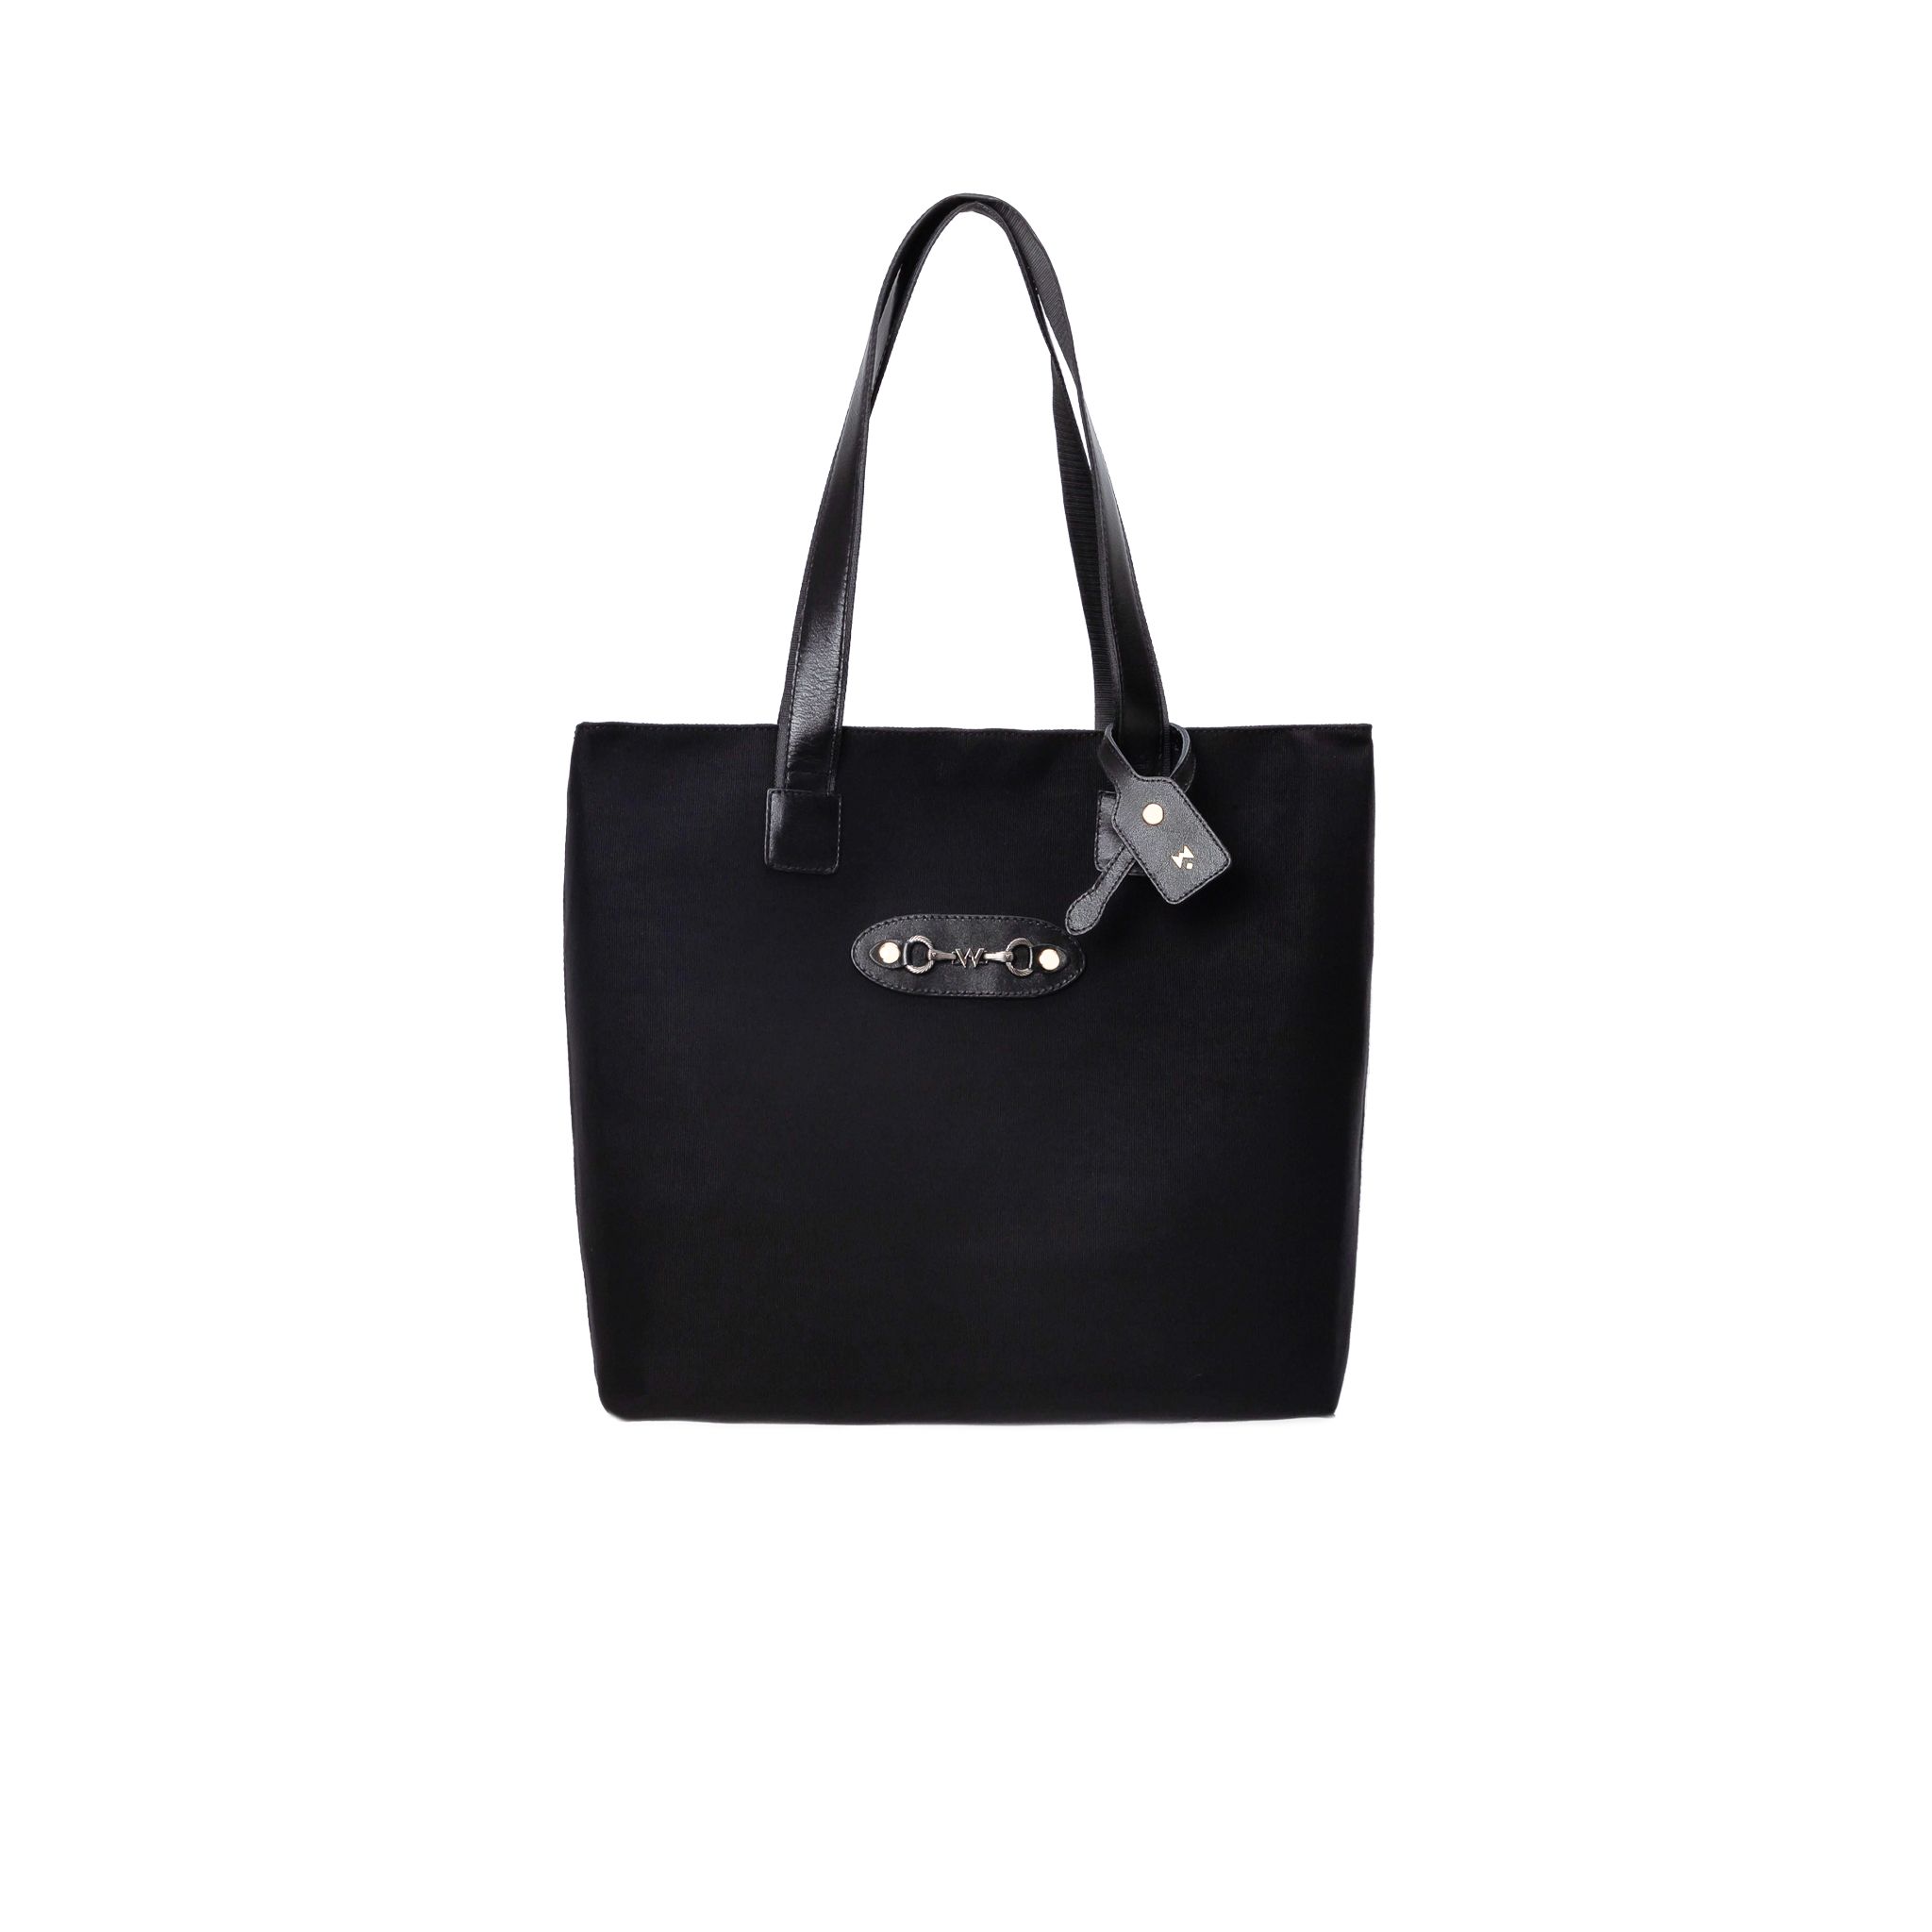 THE S-WOLF TOTE BAG - BLACK – THEWOLF